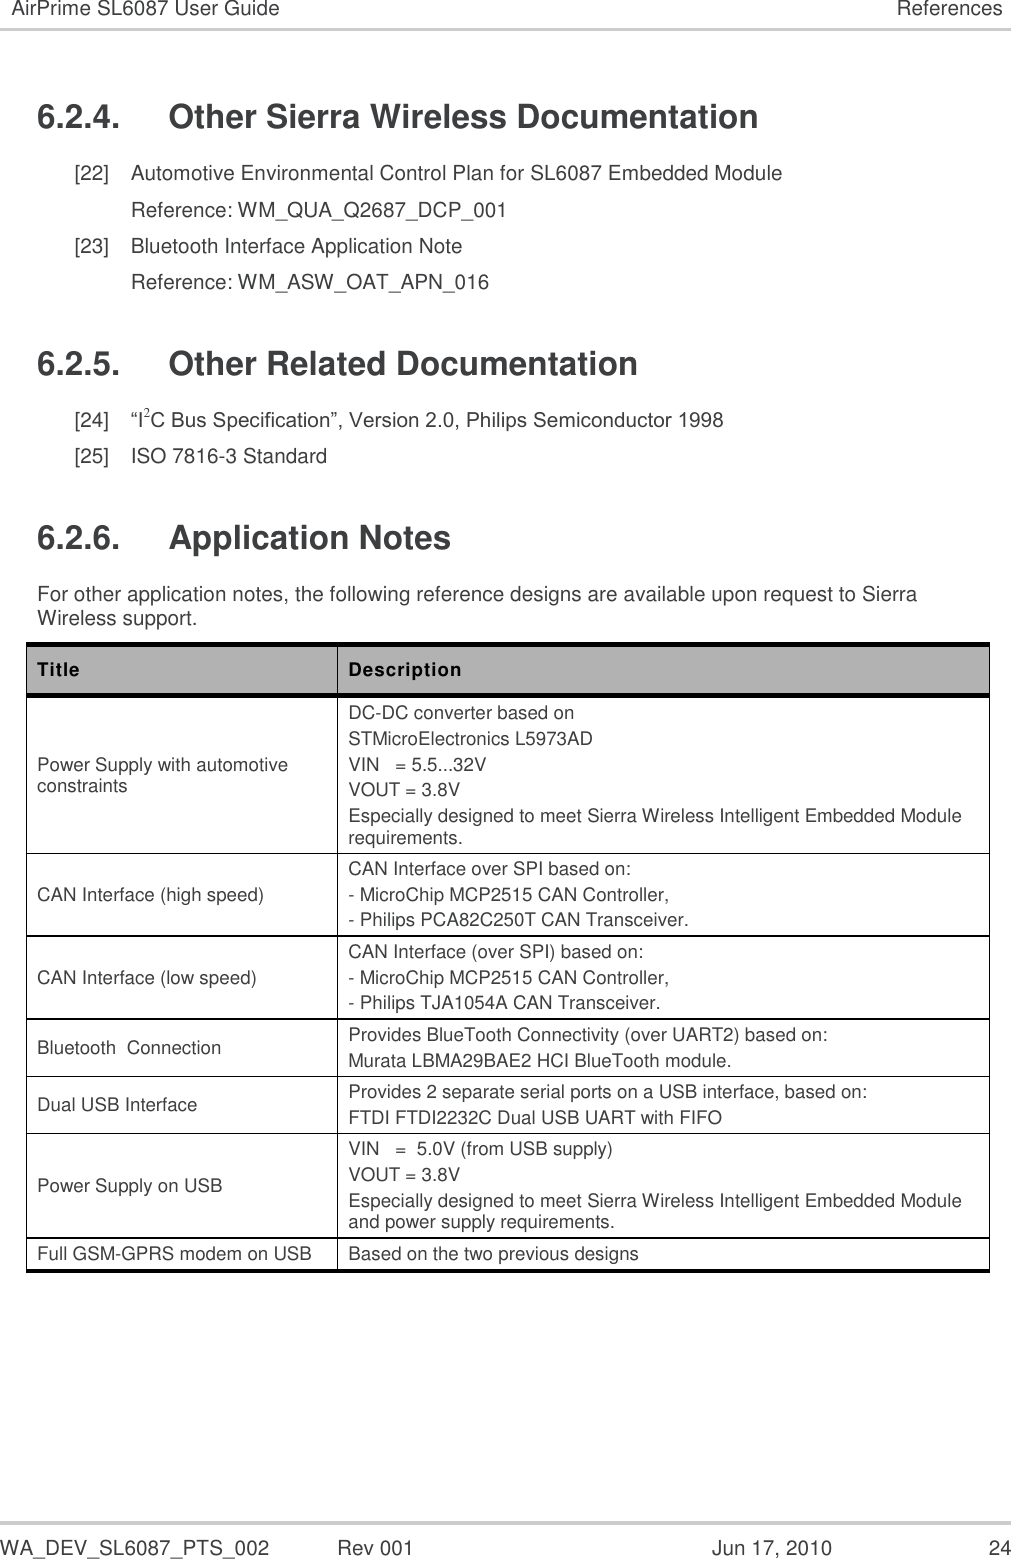   WA_DEV_SL6087_PTS_002  Rev 001  Jun 17, 2010  24 AirPrime SL6087 User Guide References 6.2.4.  Other Sierra Wireless Documentation [22] Automotive Environmental Control Plan for SL6087 Embedded Module Reference: WM_QUA_Q2687_DCP_001 [23] Bluetooth Interface Application Note  Reference: WM_ASW_OAT_APN_016 6.2.5.  Other Related Documentation [24] “I2C Bus Specification”, Version 2.0, Philips Semiconductor 1998 [25] ISO 7816-3 Standard 6.2.6.  Application Notes For other application notes, the following reference designs are available upon request to Sierra Wireless support. Title Description Power Supply with automotive constraints DC-DC converter based on   STMicroElectronics L5973AD VIN   = 5.5...32V VOUT = 3.8V Especially designed to meet Sierra Wireless Intelligent Embedded Module requirements. CAN Interface (high speed) CAN Interface over SPI based on: - MicroChip MCP2515 CAN Controller, - Philips PCA82C250T CAN Transceiver. CAN Interface (low speed) CAN Interface (over SPI) based on: - MicroChip MCP2515 CAN Controller, - Philips TJA1054A CAN Transceiver. Bluetooth  Connection Provides BlueTooth Connectivity (over UART2) based on:  Murata LBMA29BAE2 HCI BlueTooth module. Dual USB Interface Provides 2 separate serial ports on a USB interface, based on: FTDI FTDI2232C Dual USB UART with FIFO Power Supply on USB  VIN   =  5.0V (from USB supply) VOUT = 3.8V Especially designed to meet Sierra Wireless Intelligent Embedded Module and power supply requirements. Full GSM-GPRS modem on USB Based on the two previous designs 